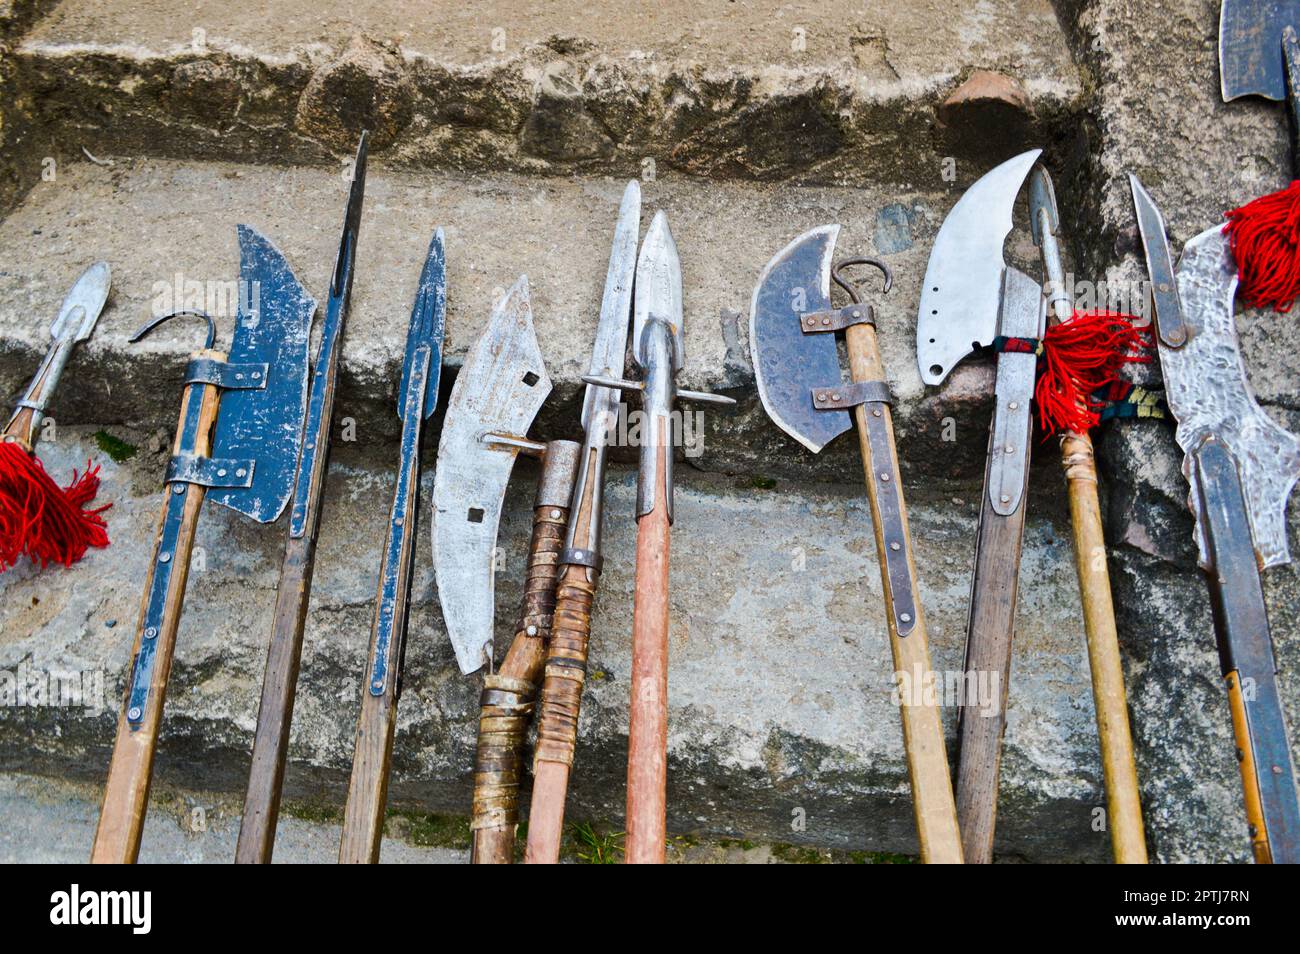 The old ancient medieval cold weapons, axes, olibards, knives, swords with wooden handles lick on the stone steps of the castle. Stock Photo